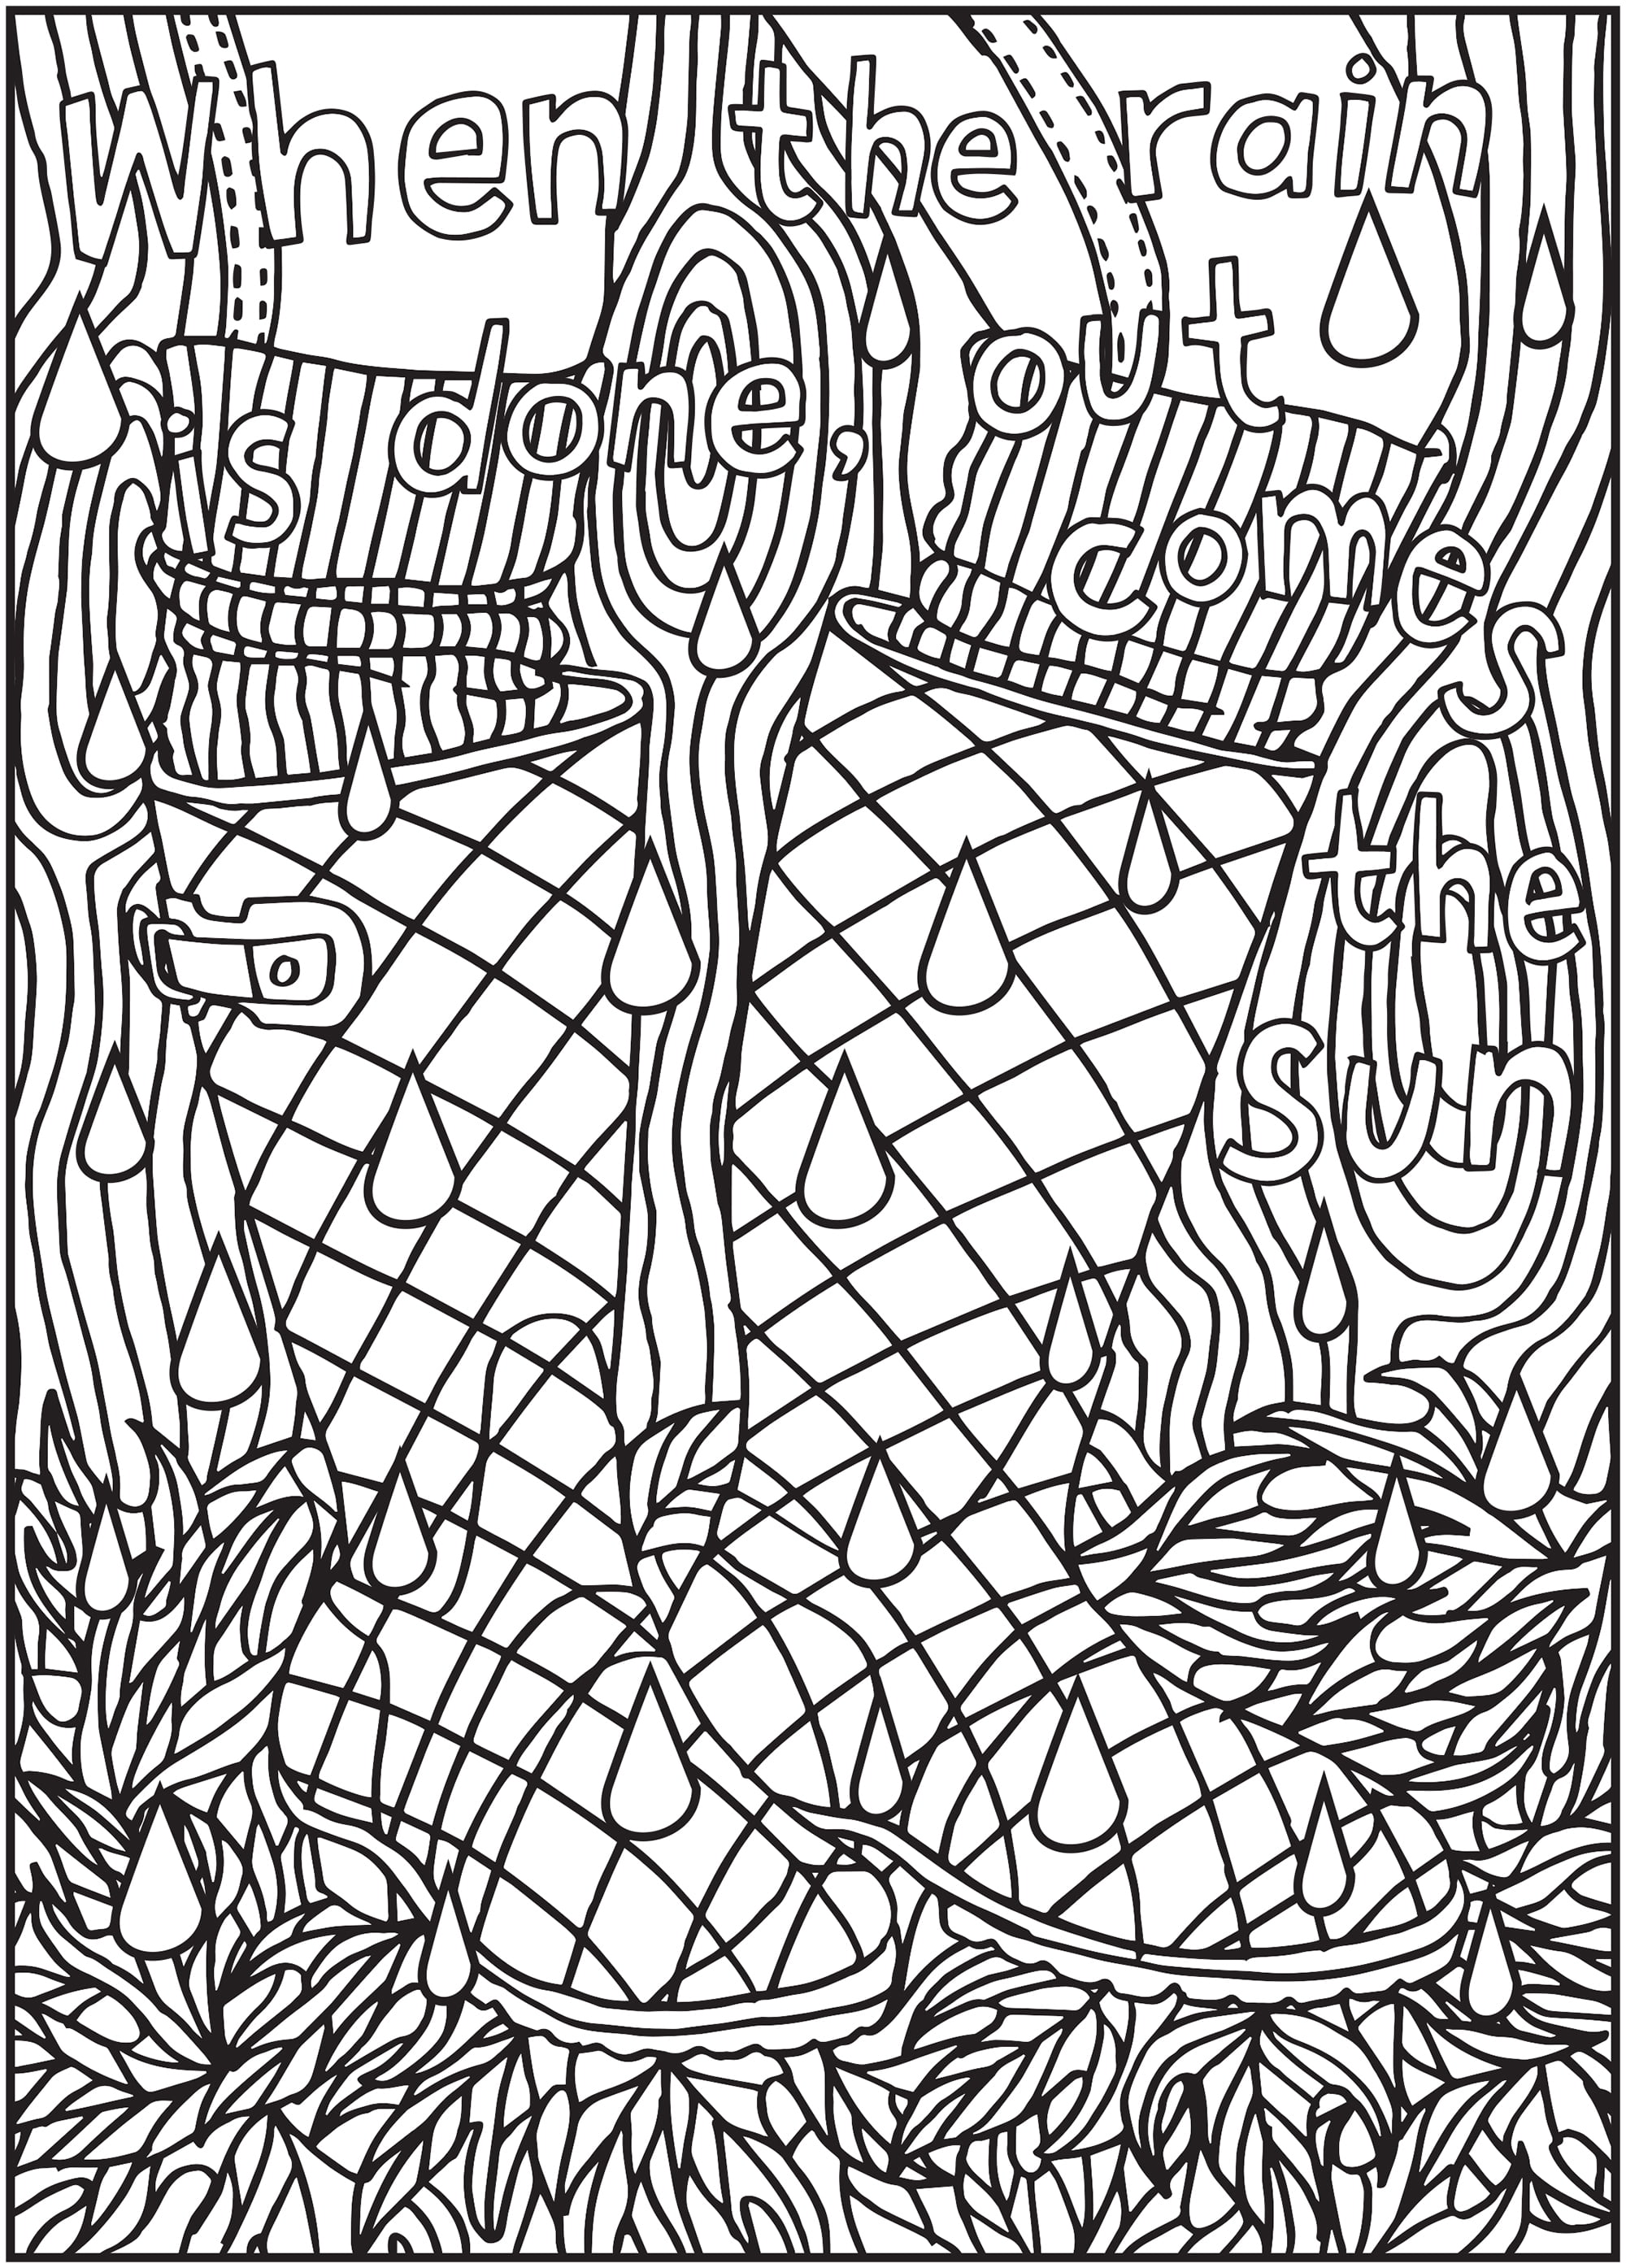 Cra-Z-Art Timeless Creations Adult Coloring Book, Words to Color